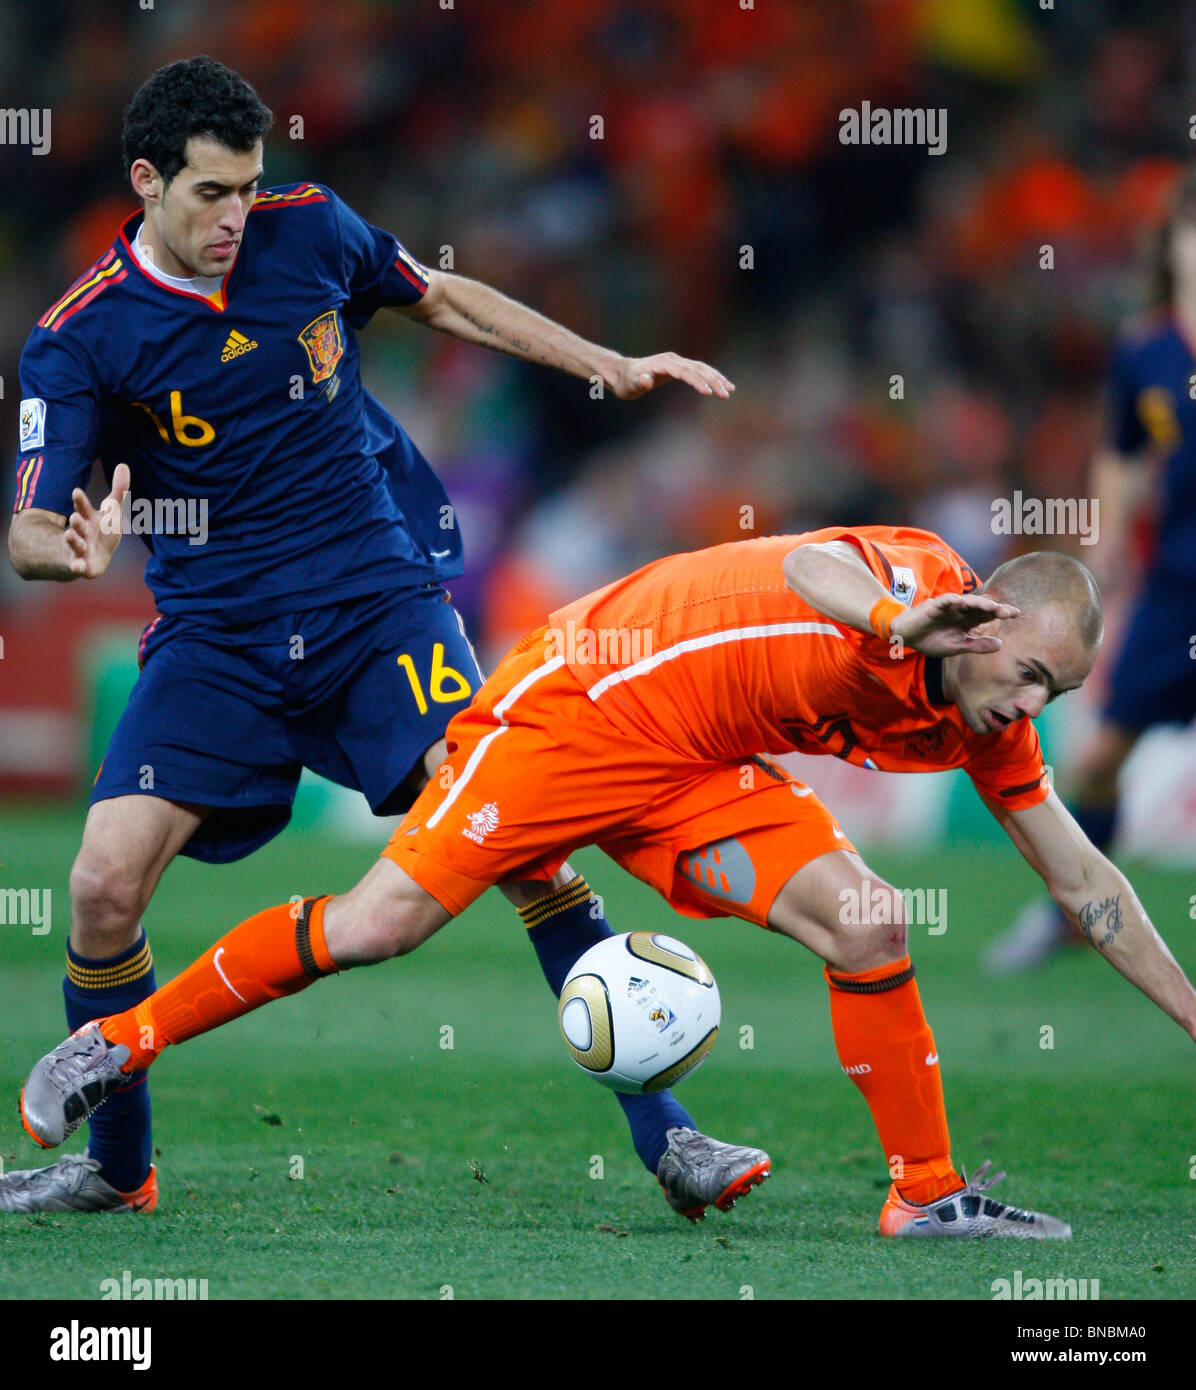 SERGIO BUSQUETS & WESLEY SNEIJ NETHERLANDS V SPAIN SOCCER CITY JOHANNESBURG SOUTH AFRICA 11 July 2010 Stock Photo